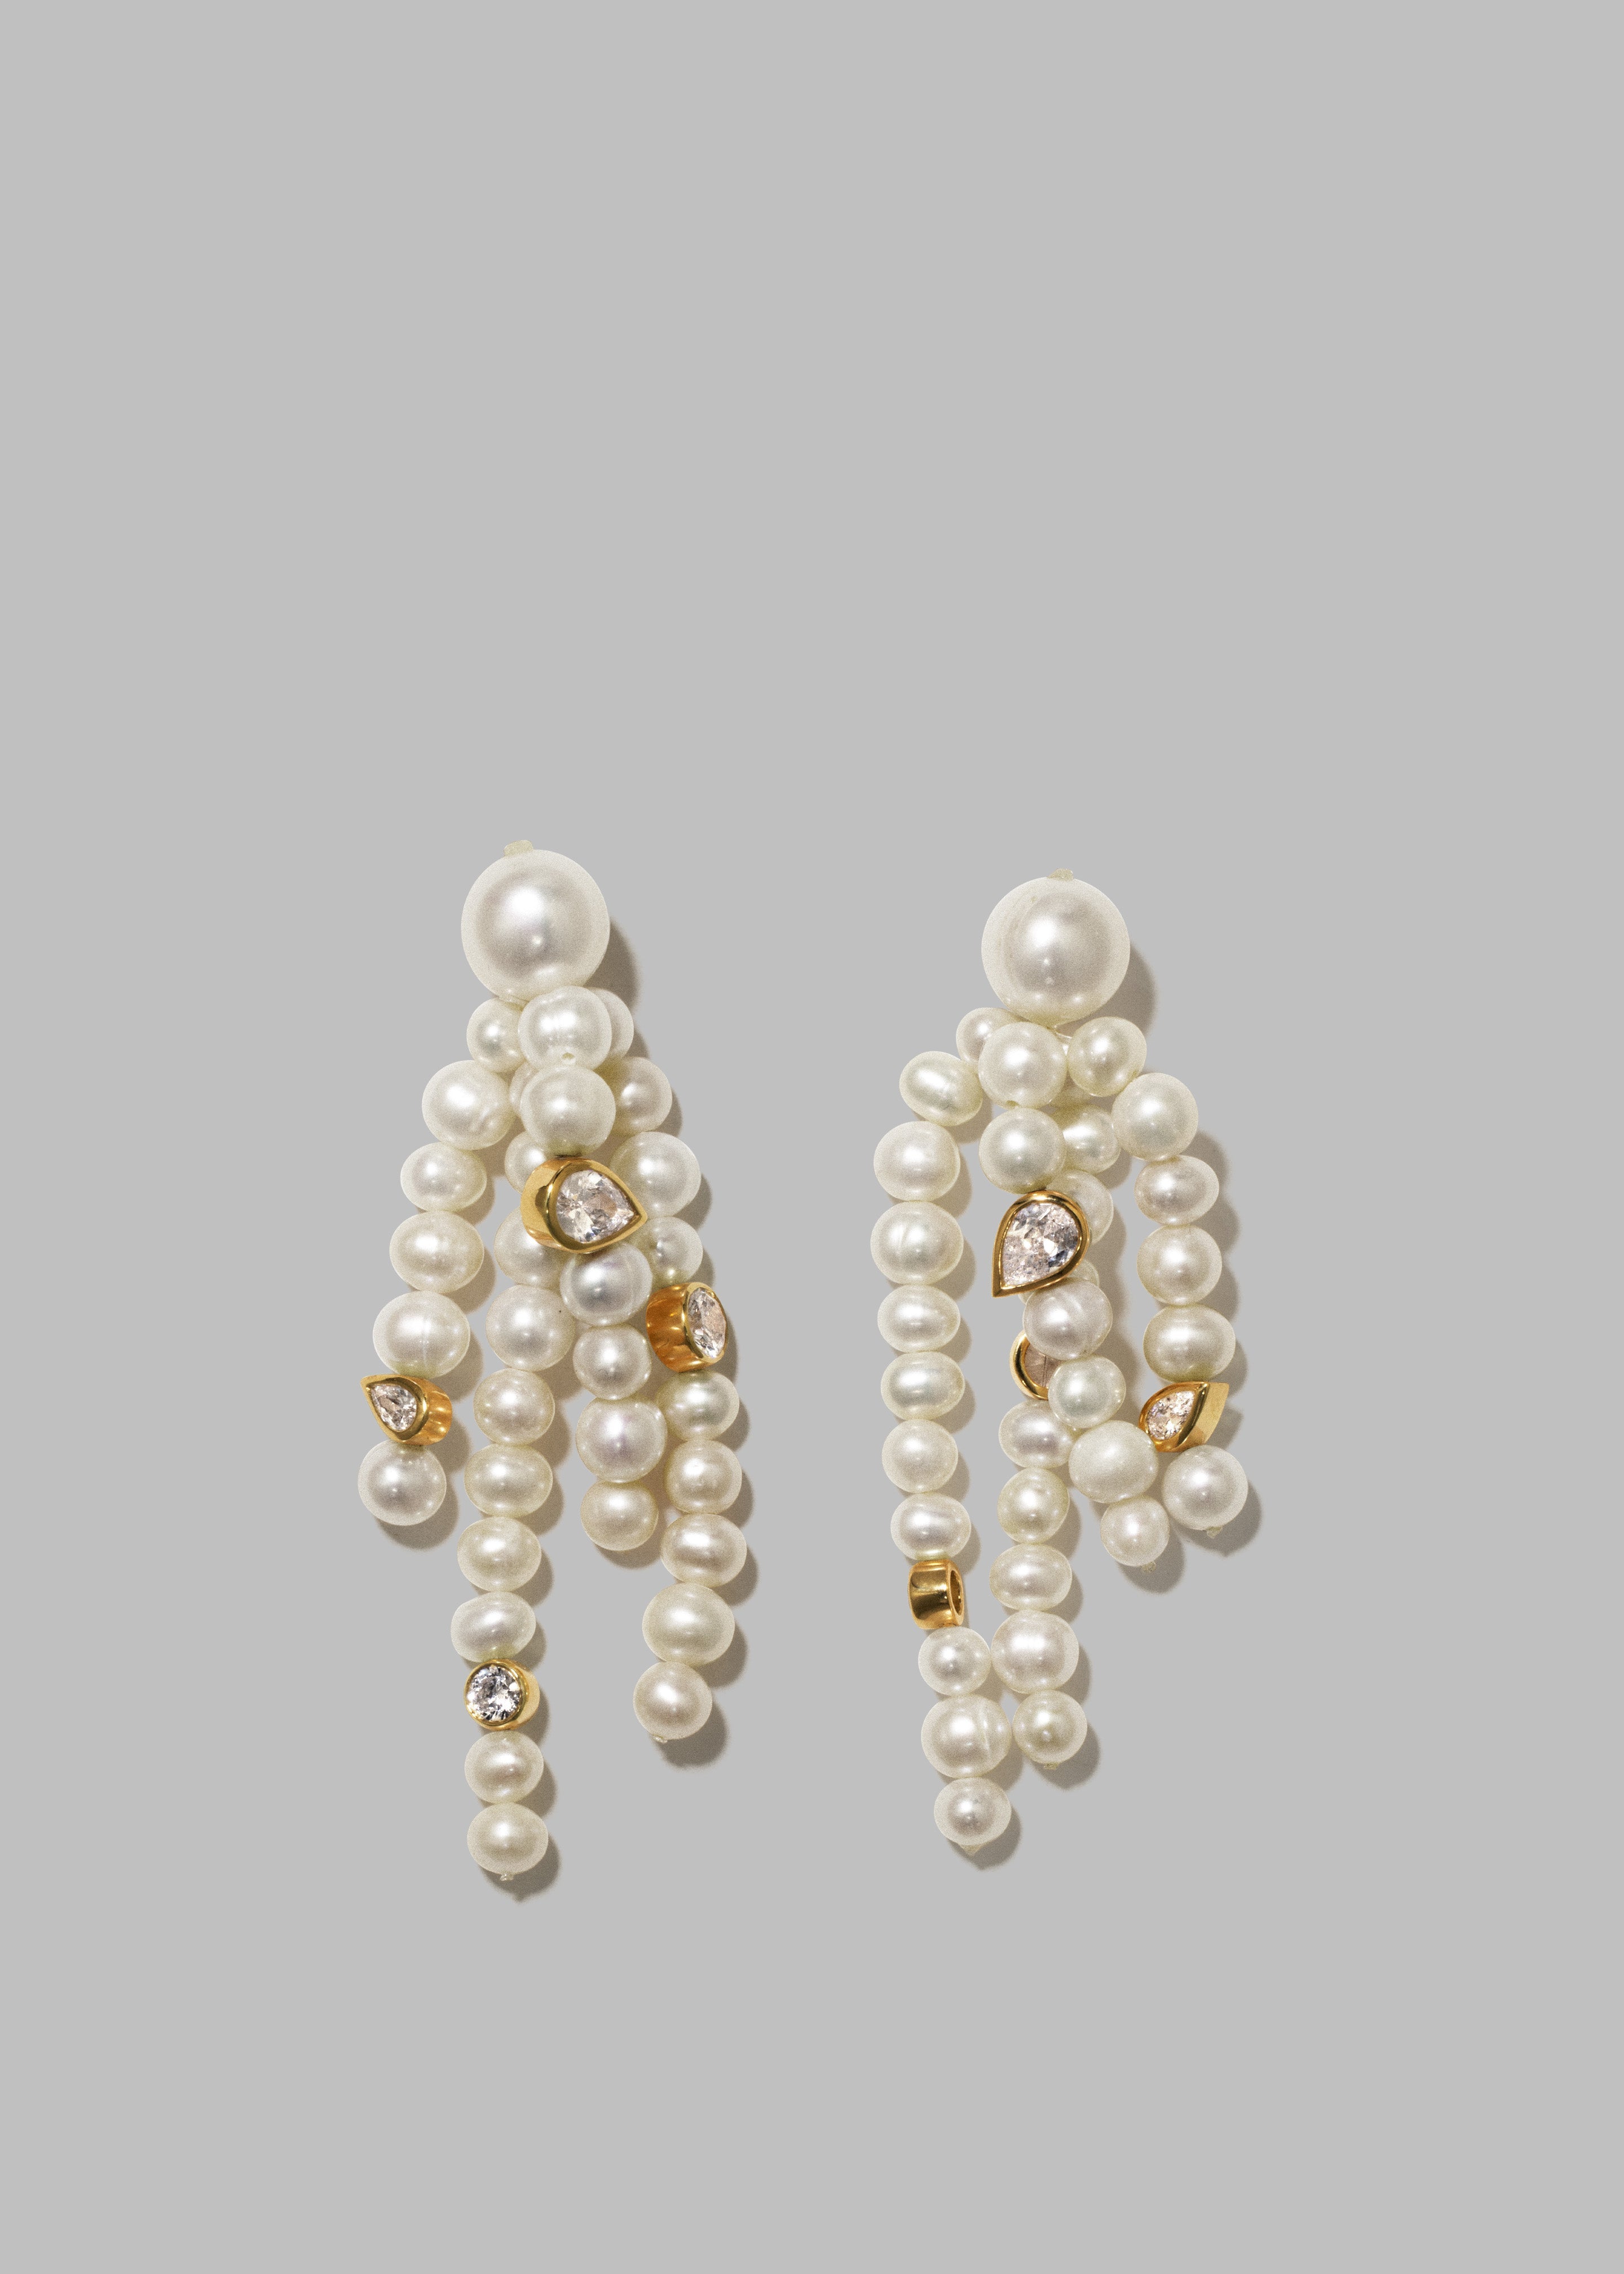 Completedworks The Bay of Thoughts Earrings - Pearl/Gold Vermeil - 1